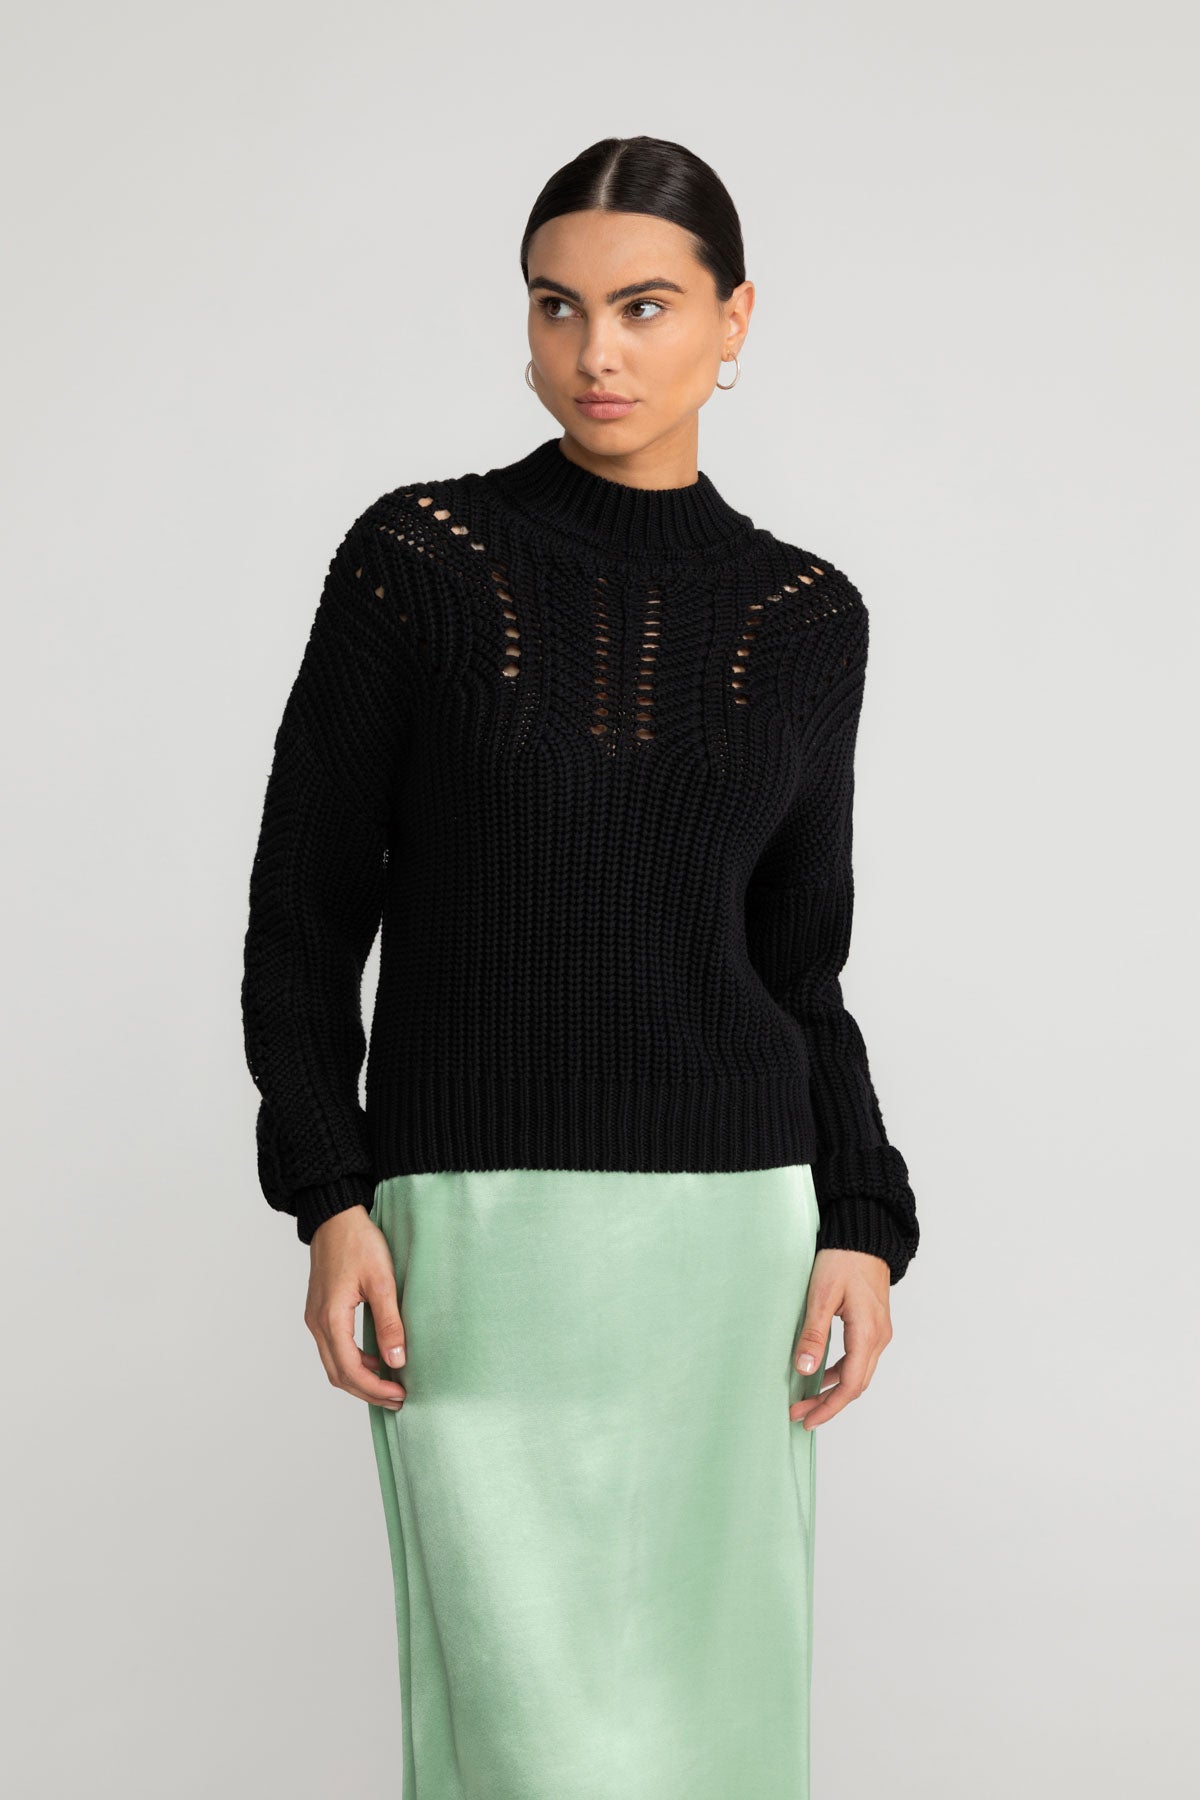 ALEIKA sweater in black from LOVJOI made of organic cotton